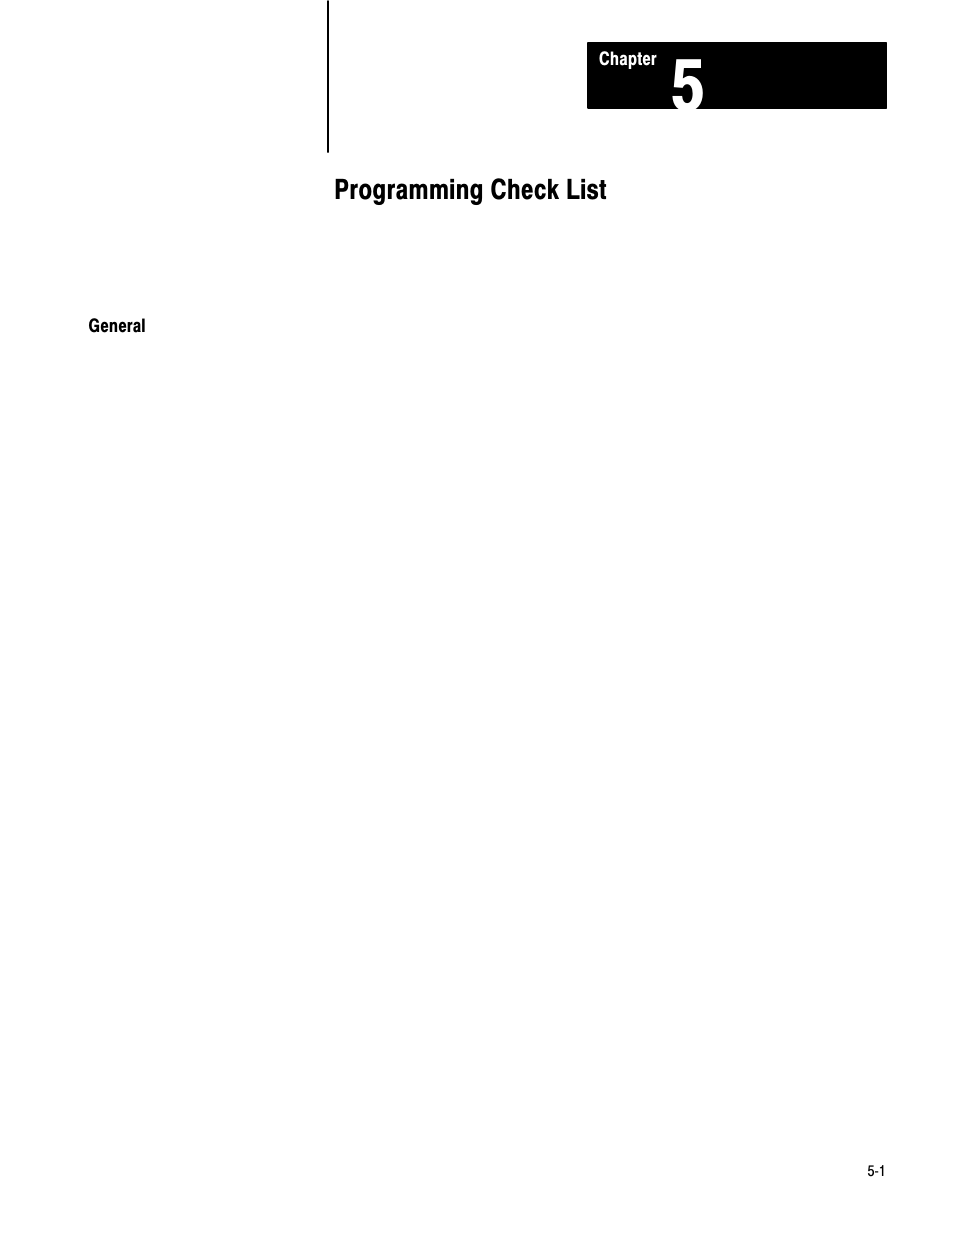 1772-6.5.2, 5 - programming check list, Programming check list | Rockwell Automation 1772-AF3,D17726.5.2 User Manual AUX FUNCT PROM User Manual | Page 29 / 32